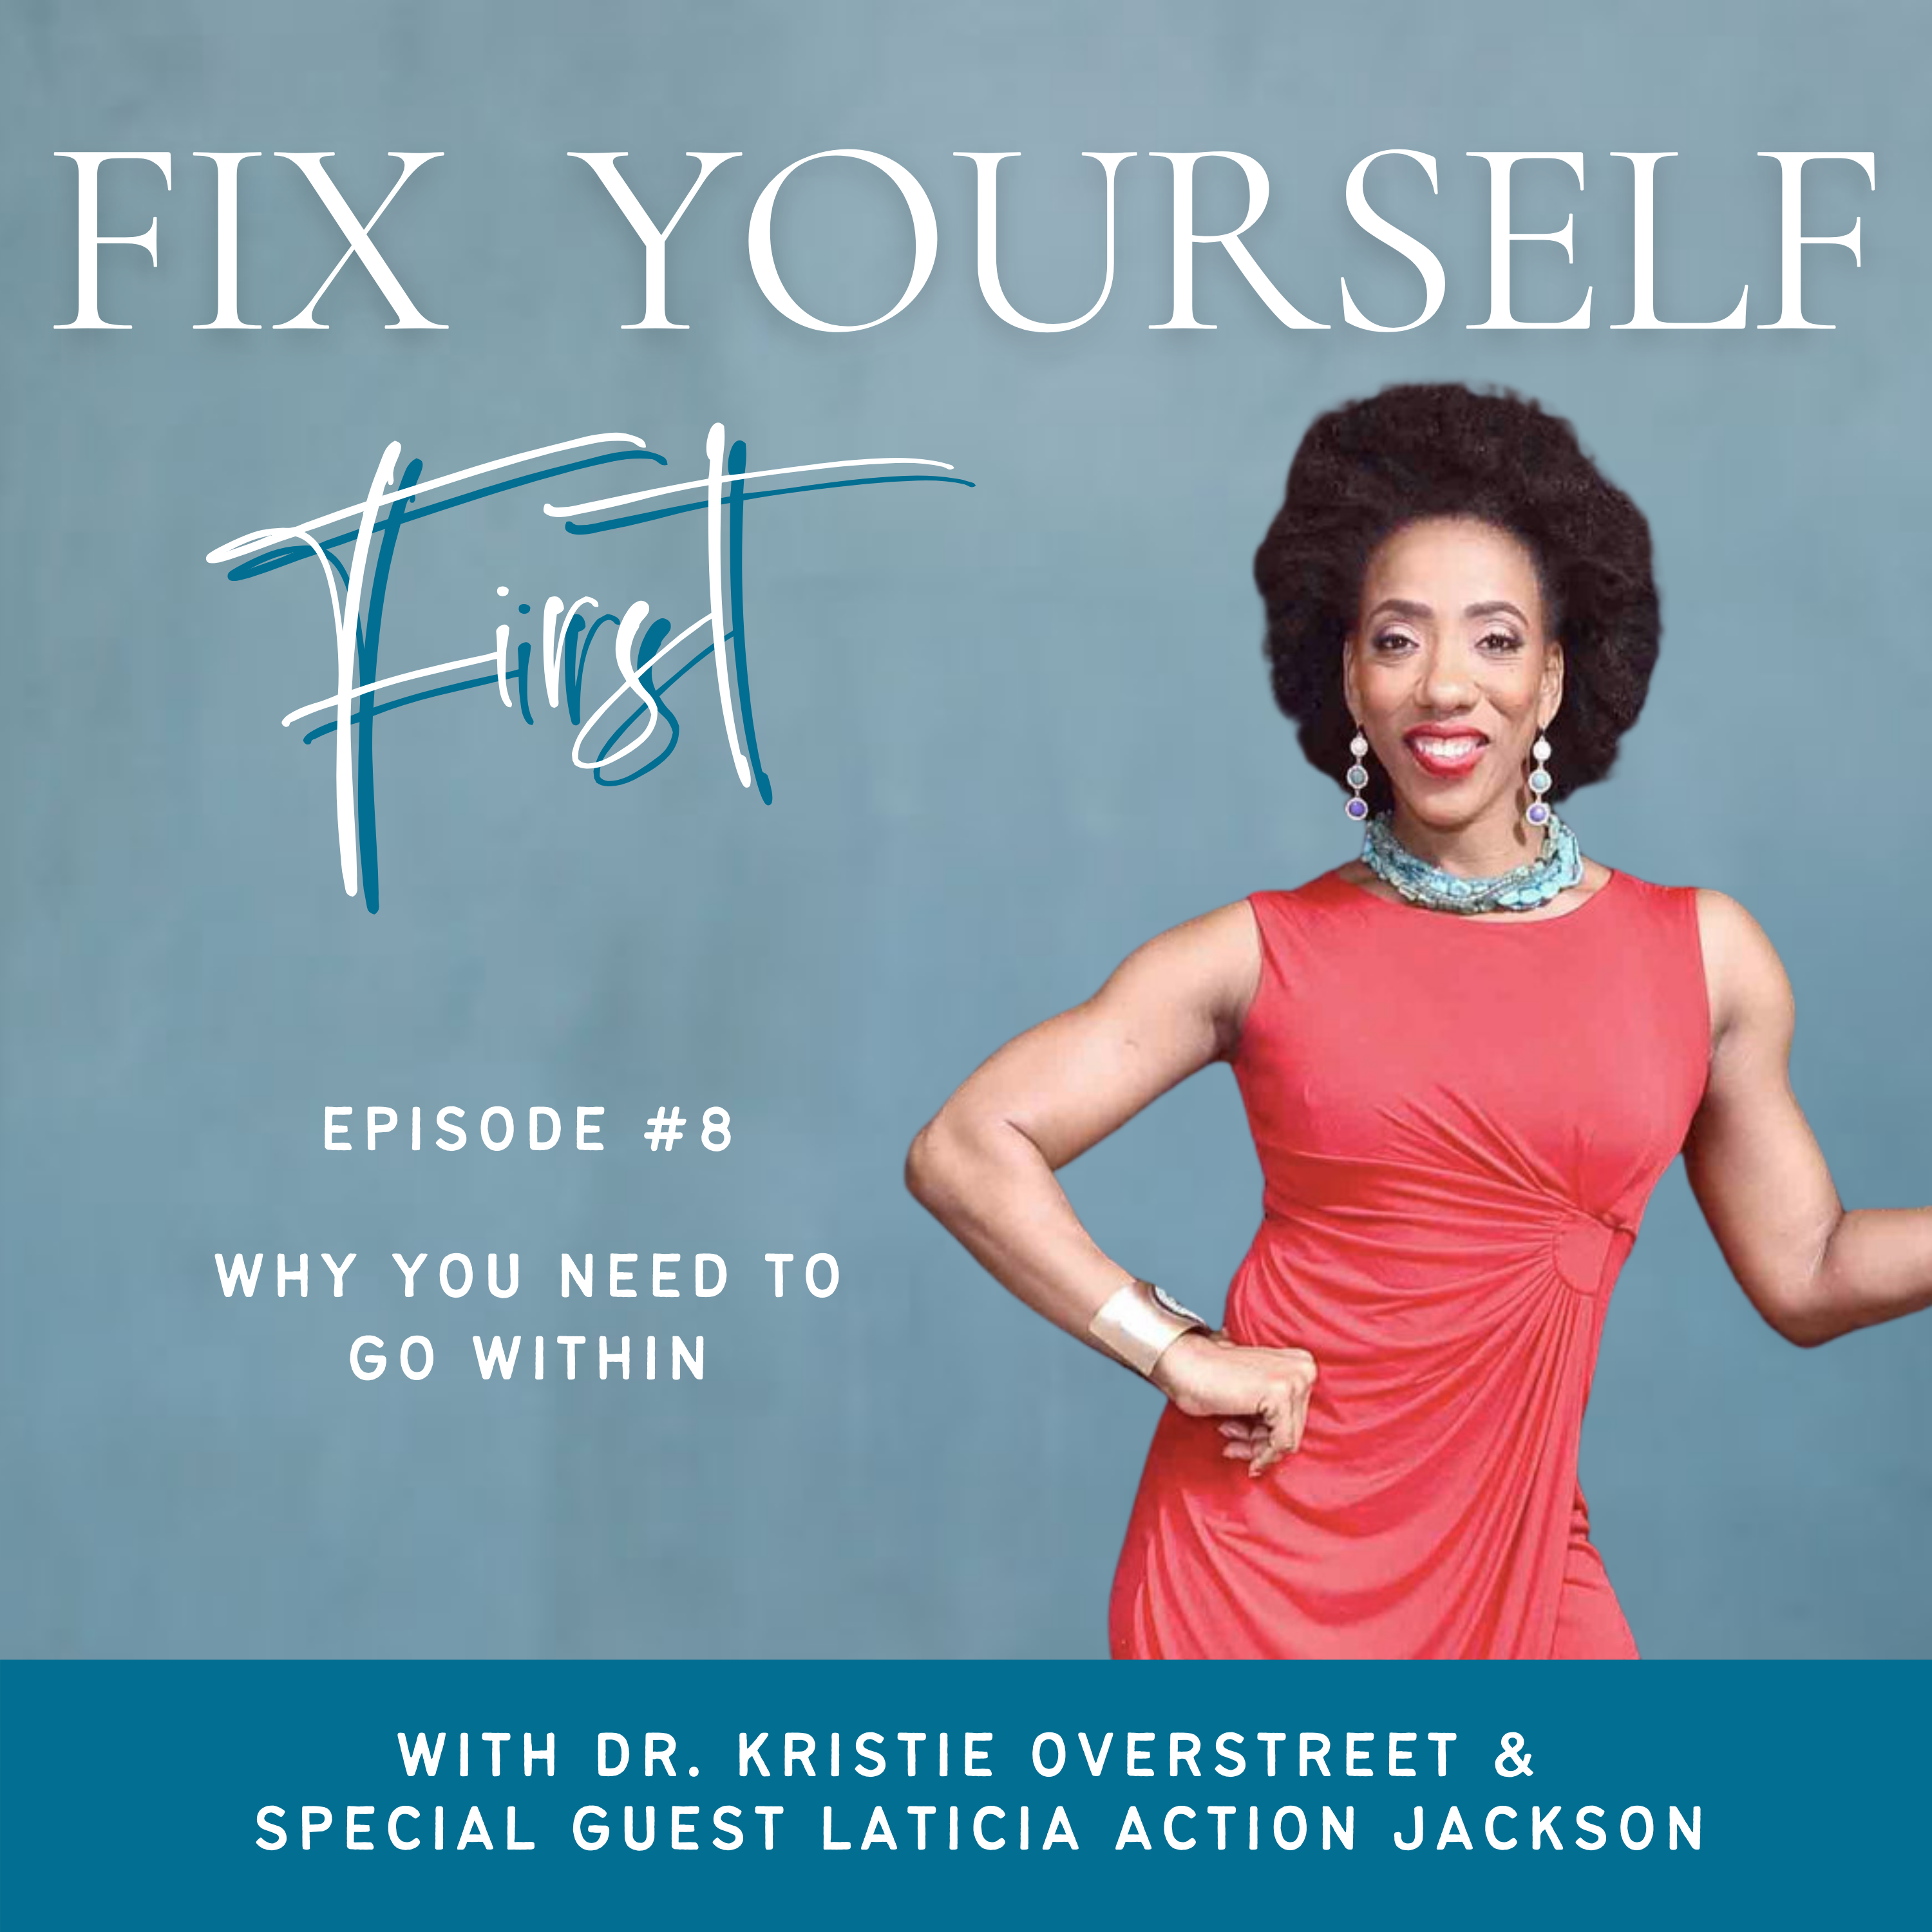 Fix Yourself First - Episode 8